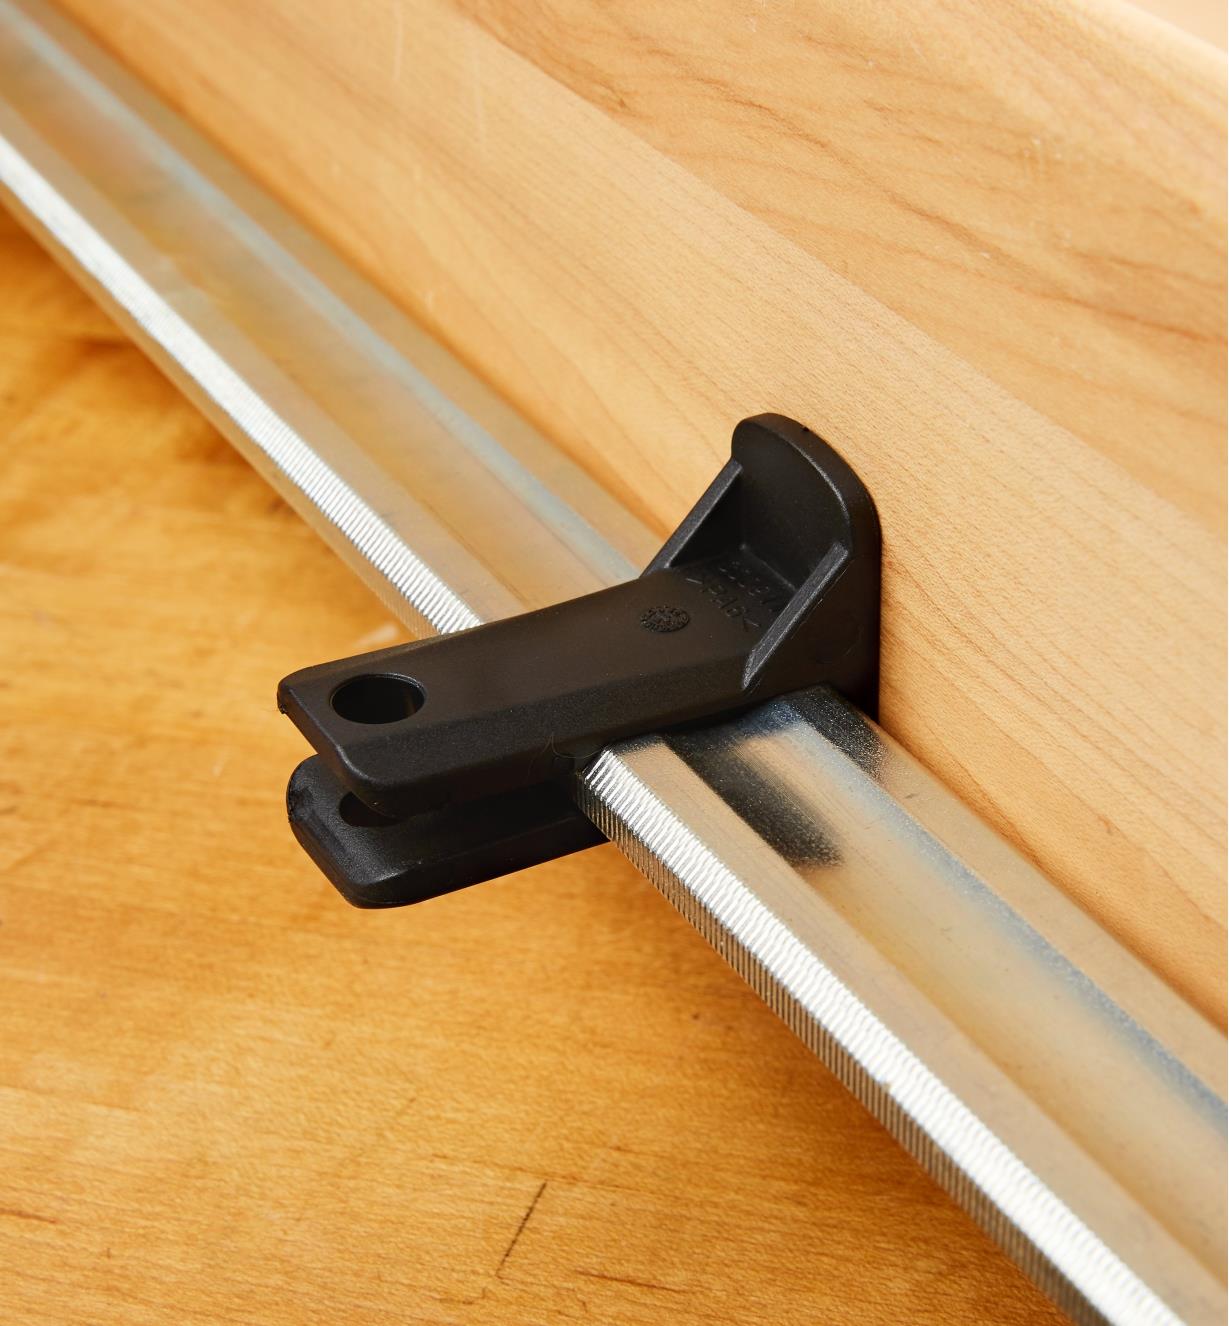 A Bessey K-Body rail protector mounted on a K-Body clamp rail